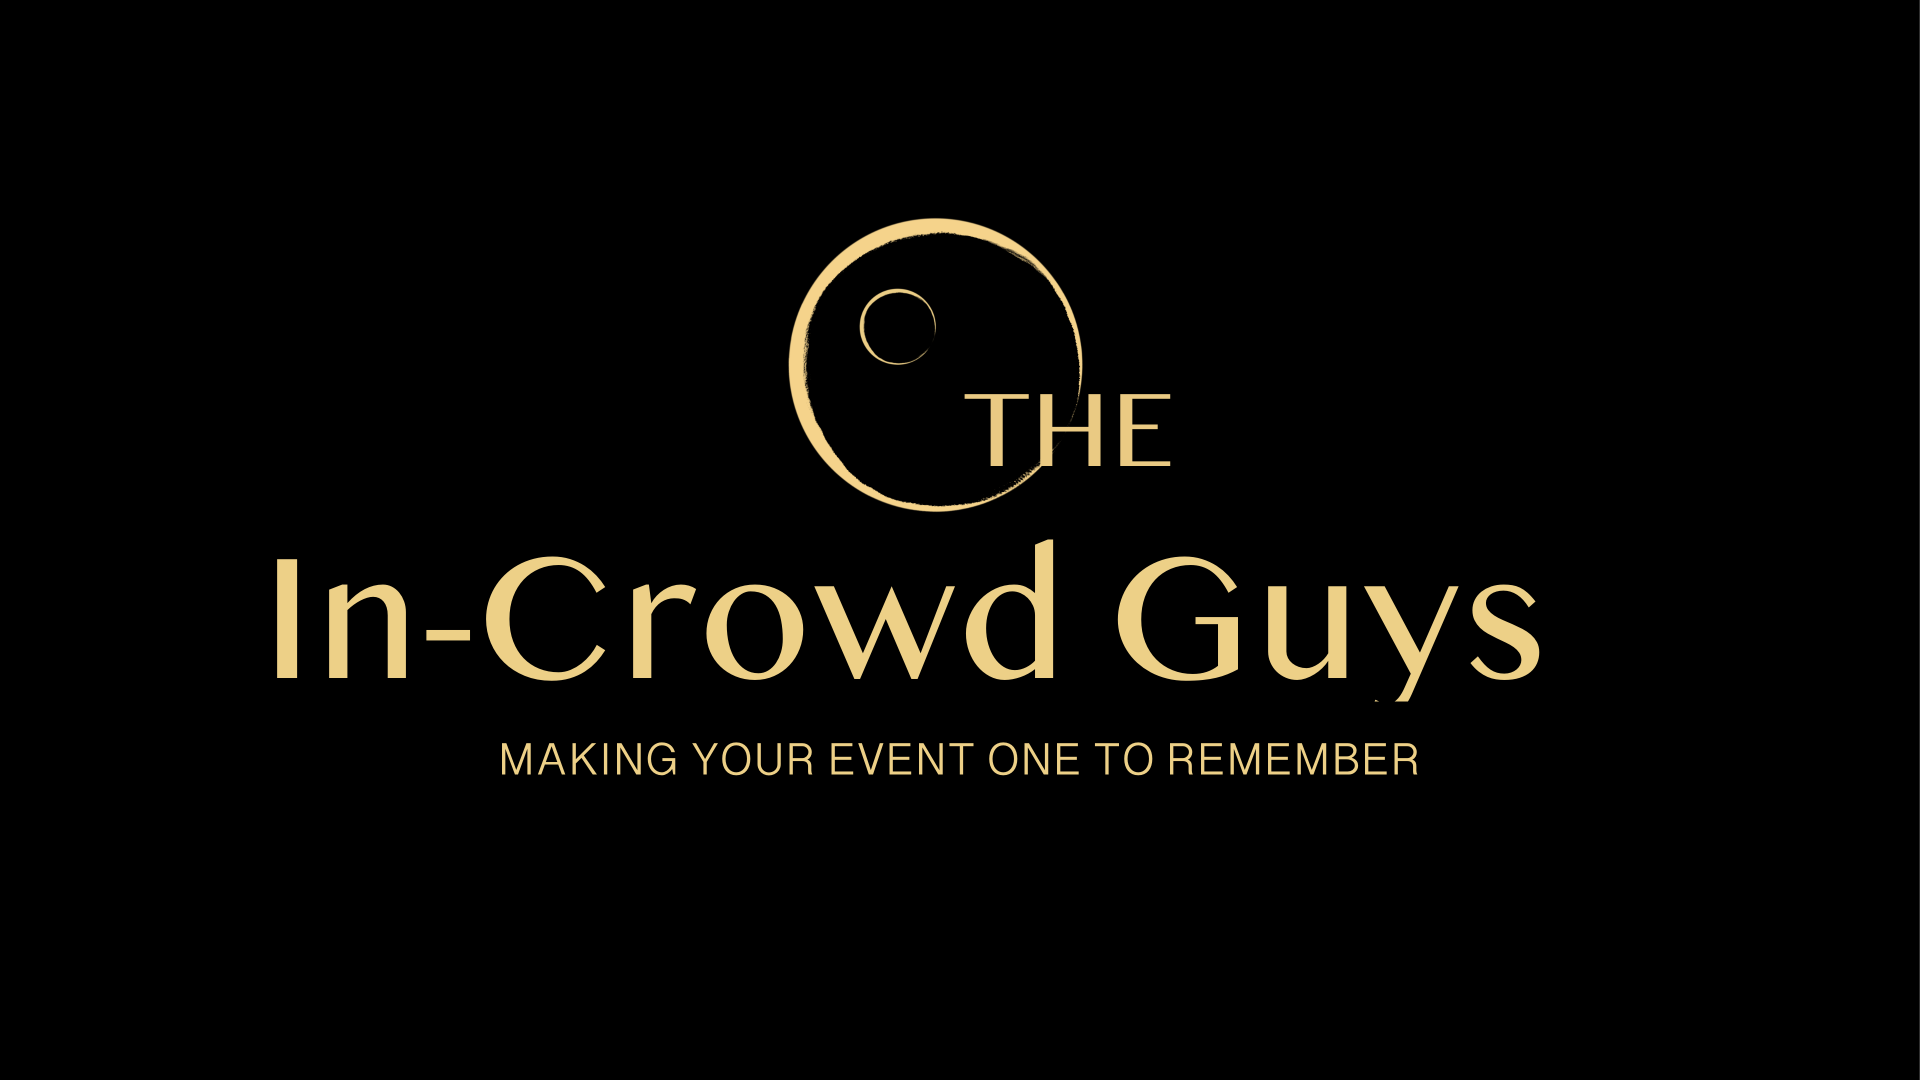 The In-Crowd Guys Team